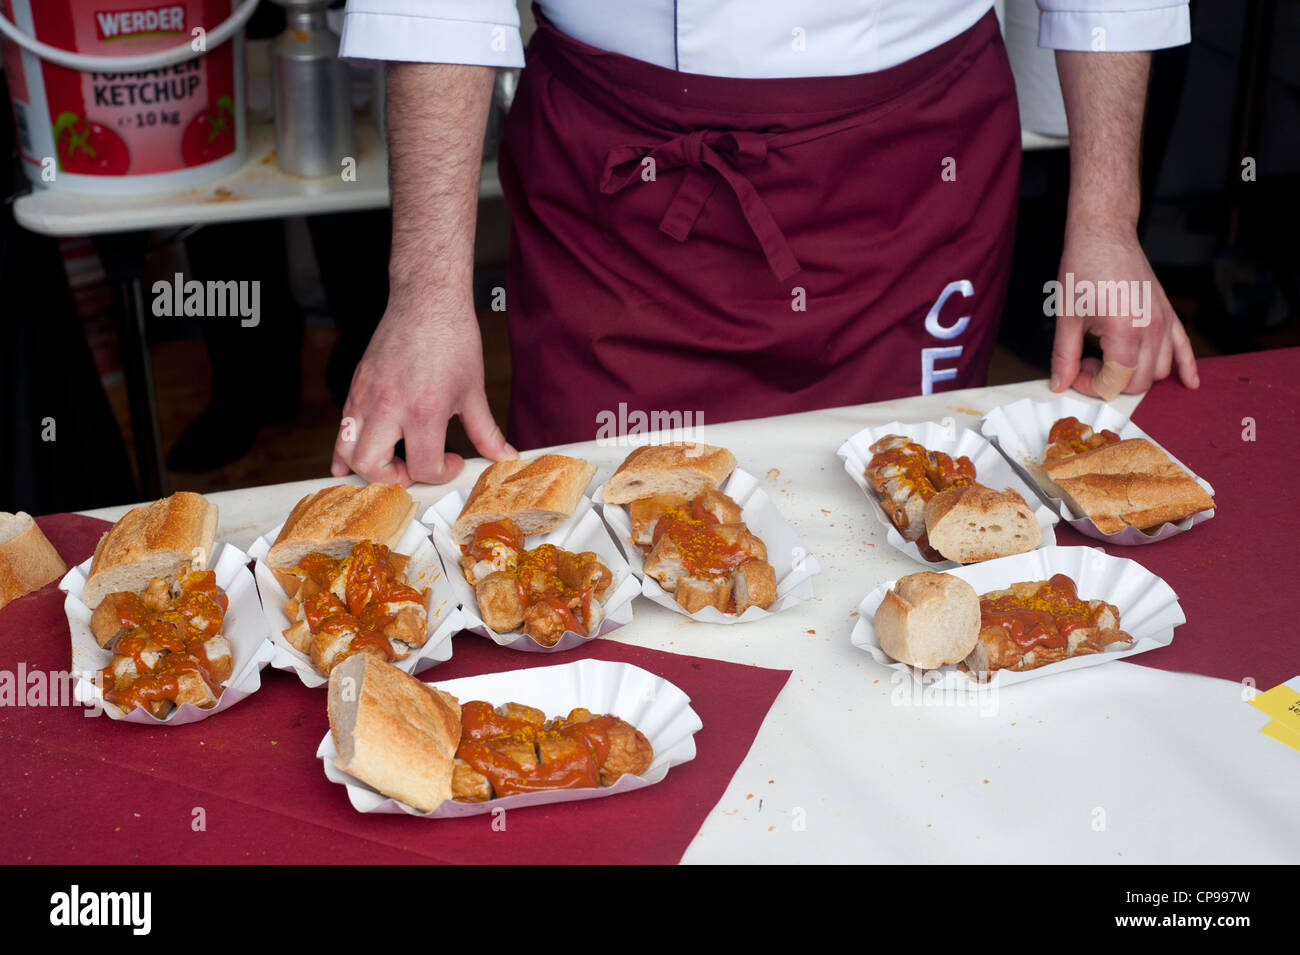 Paris, France - Curry Wurst, typical German food made of sausage and curry sauce with bread. Stock Photo